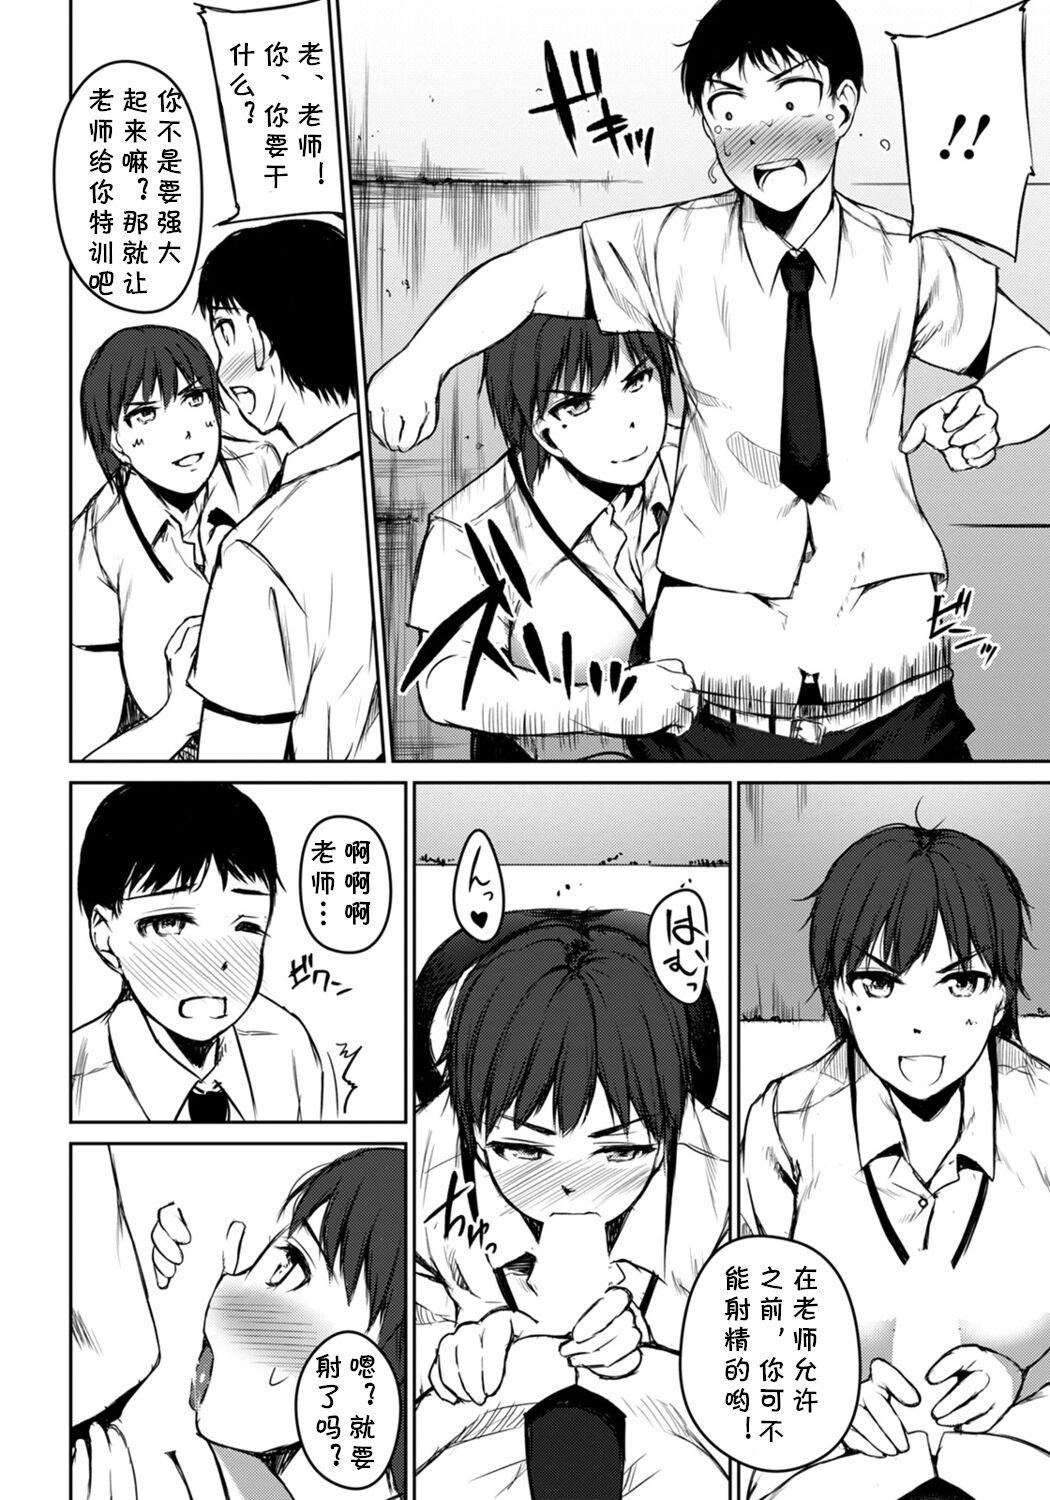 Nudity 身体で教えて! 薫先生っ! Pissing - Page 6